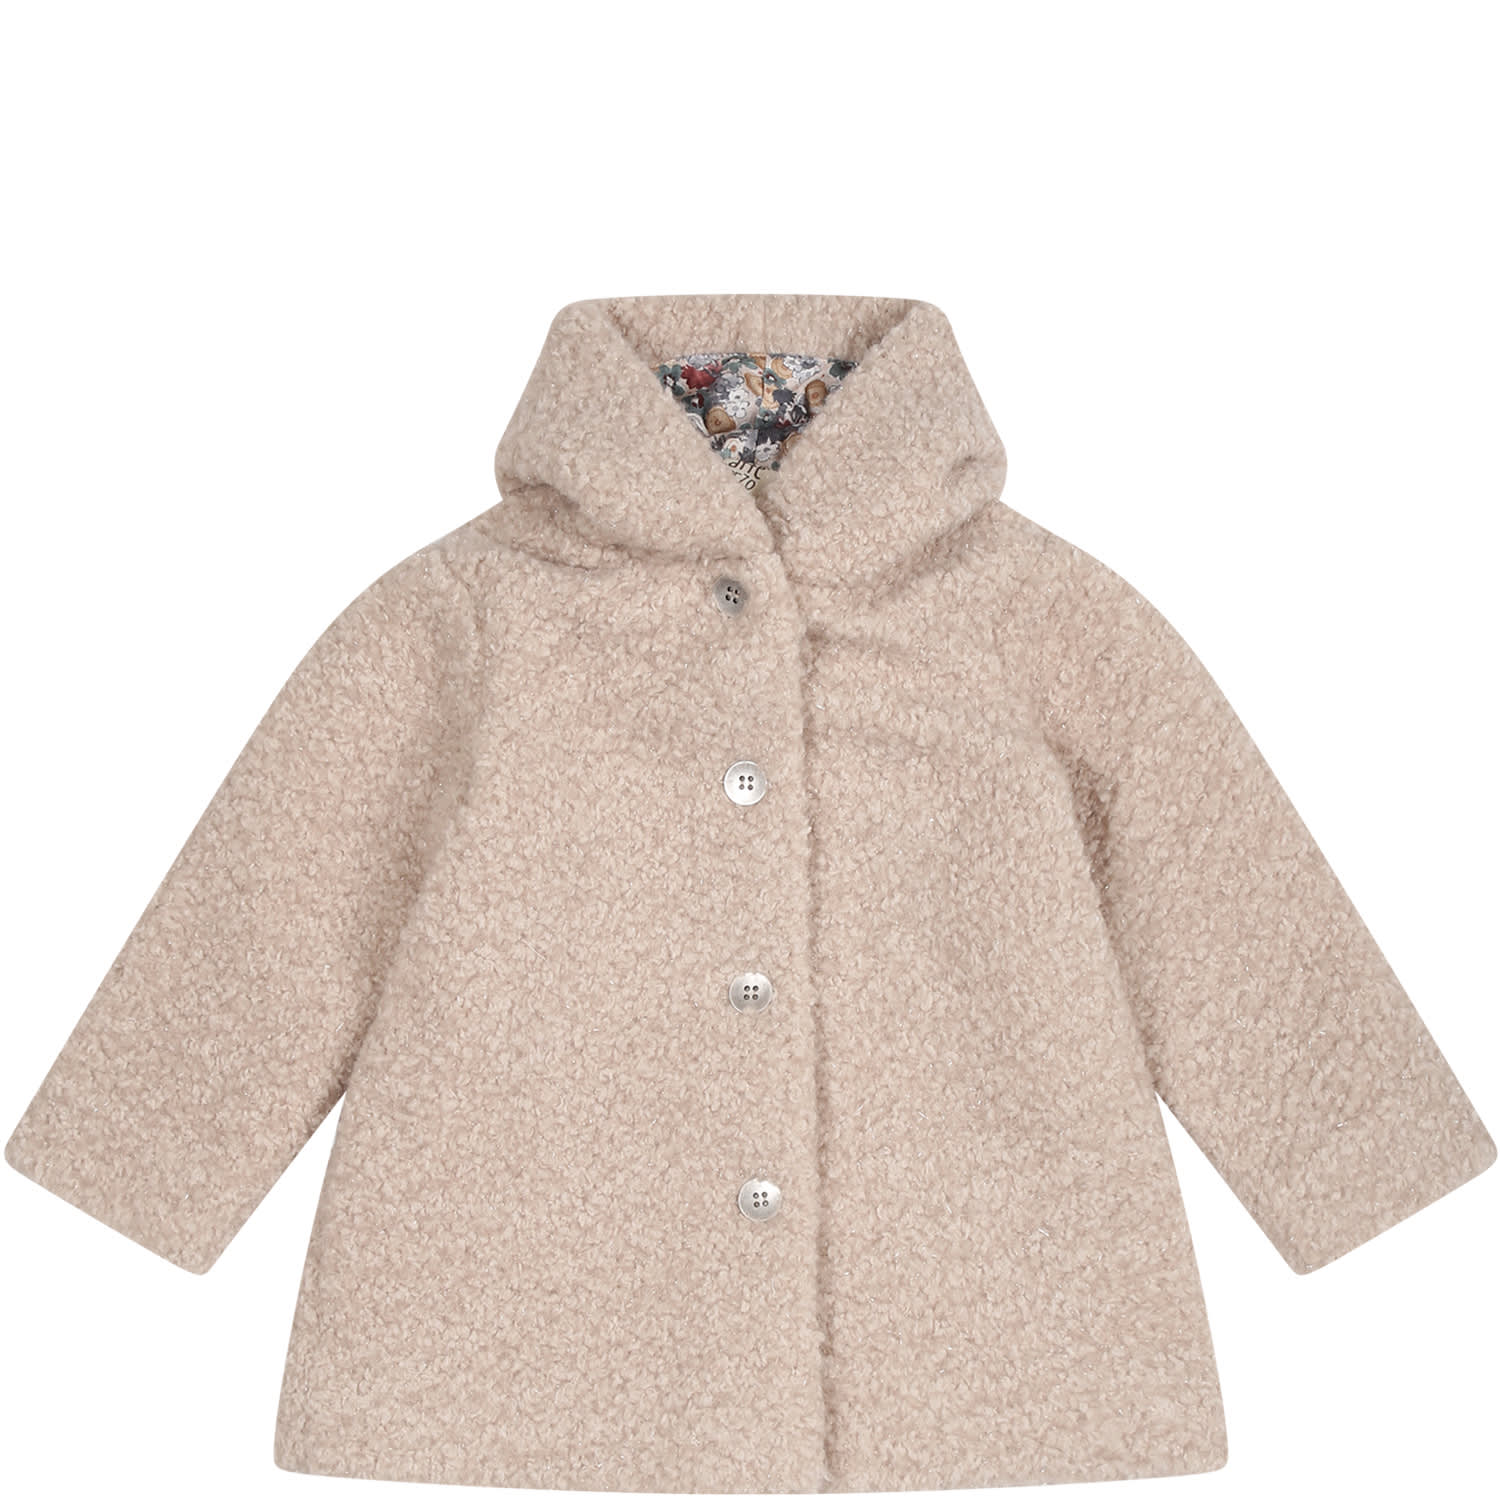 Caffe' D'orzo Beige Coat For Baby Girl